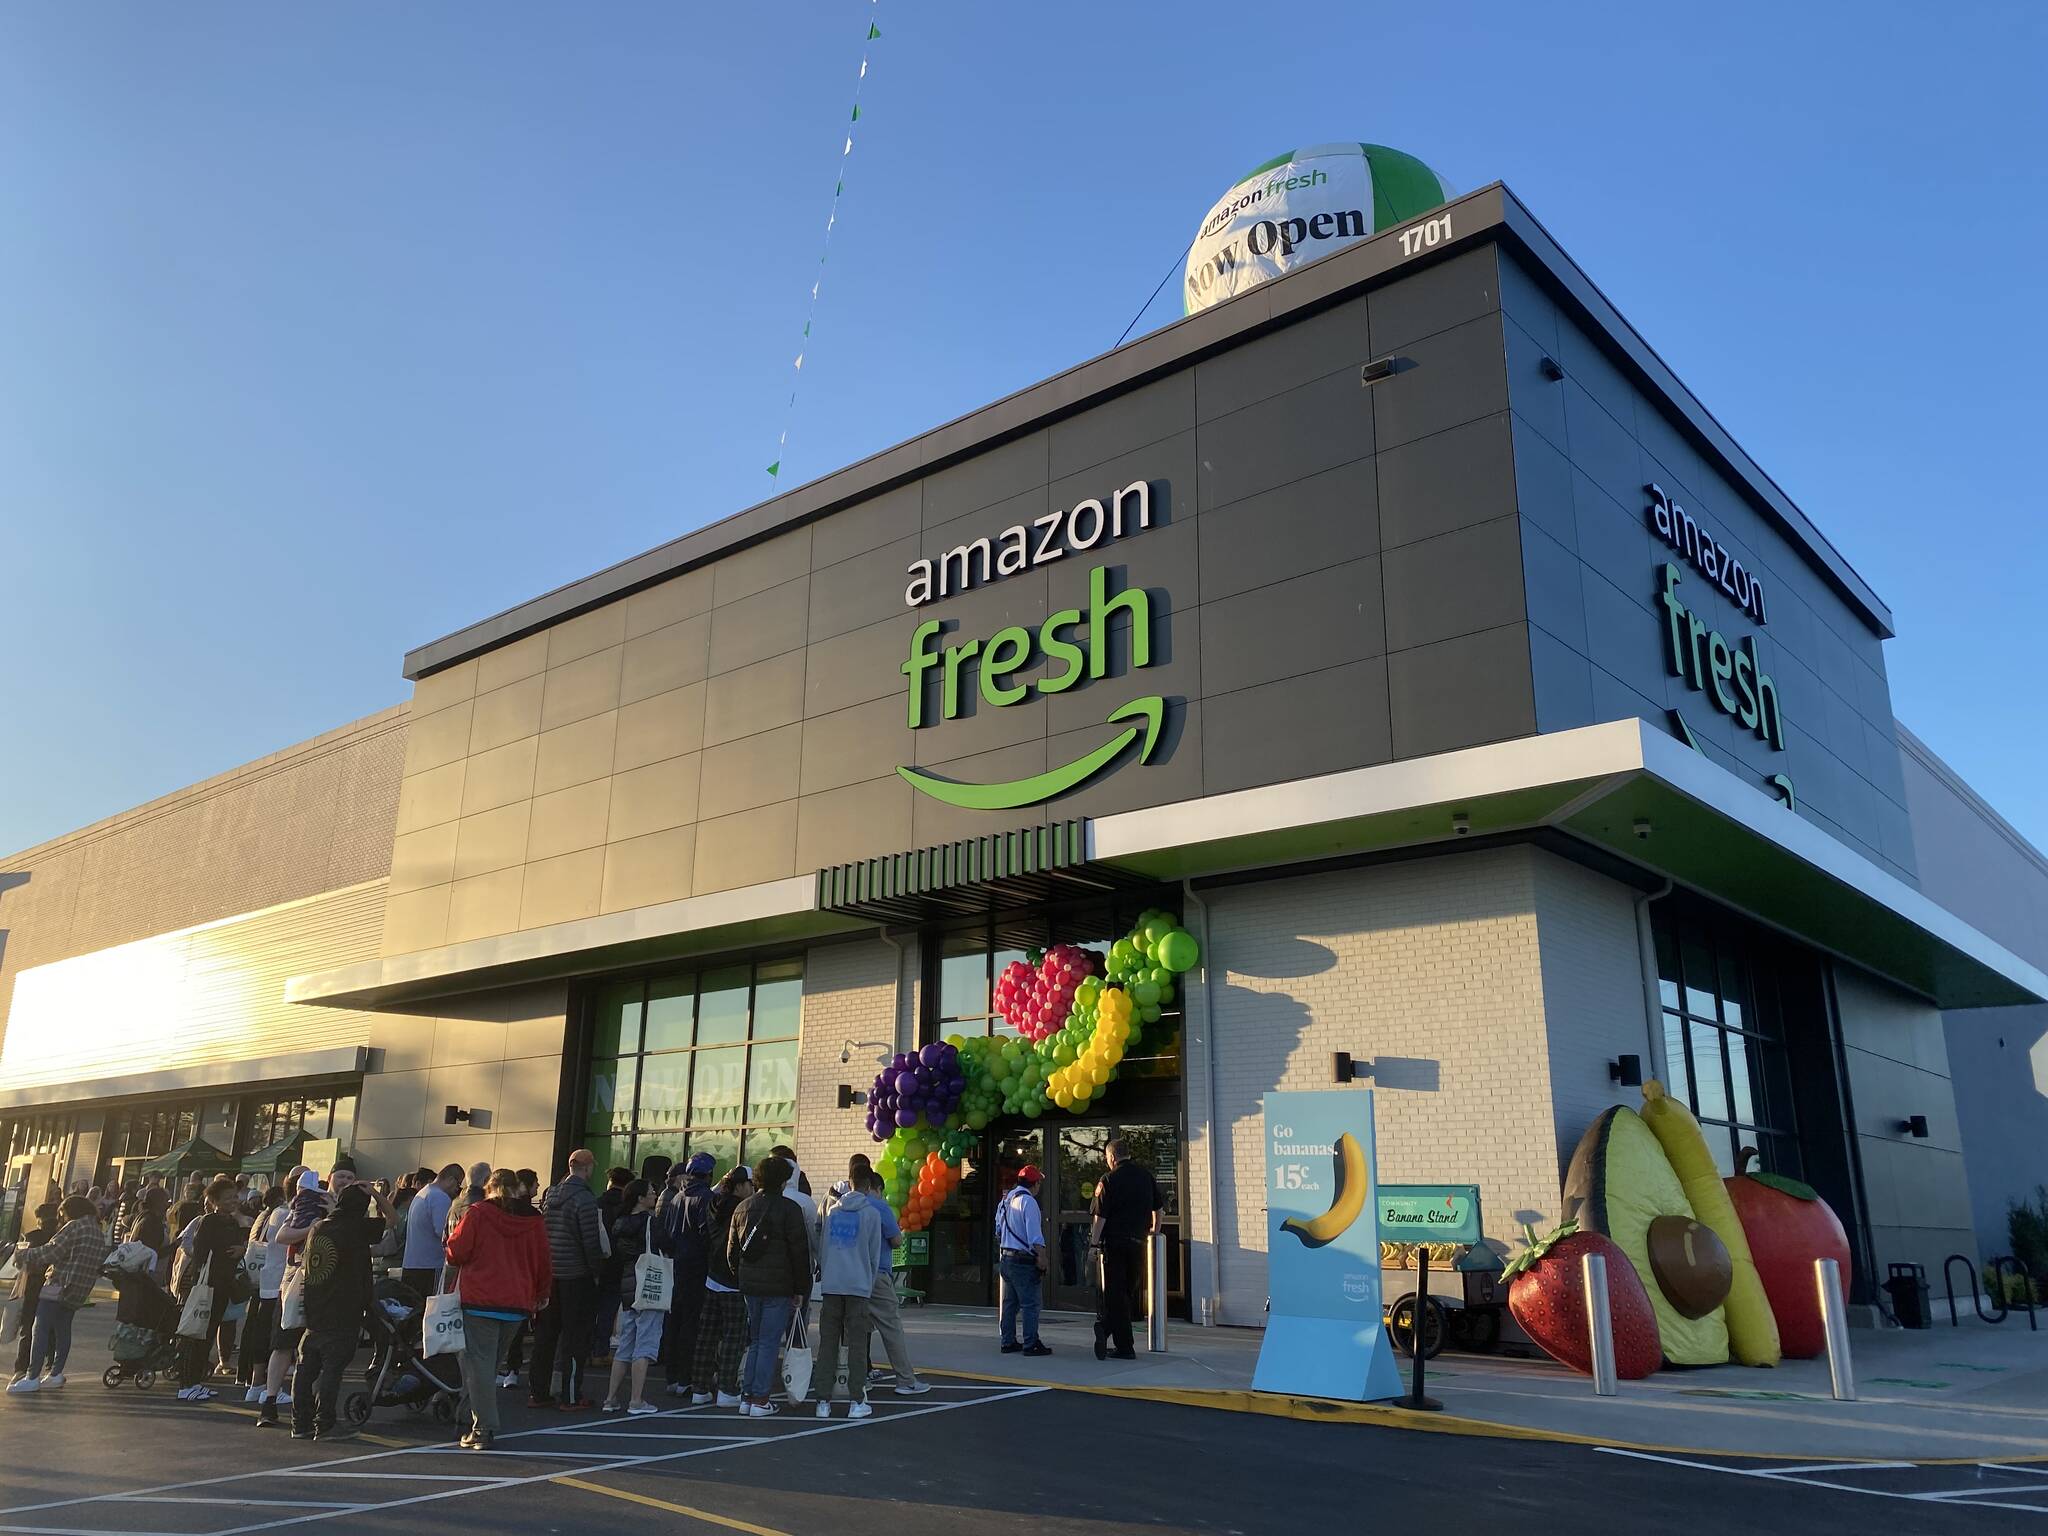 Amazon Fresh is located at 1701 S. Commons in Federal Way. Olivia Sullivan/the Mirror